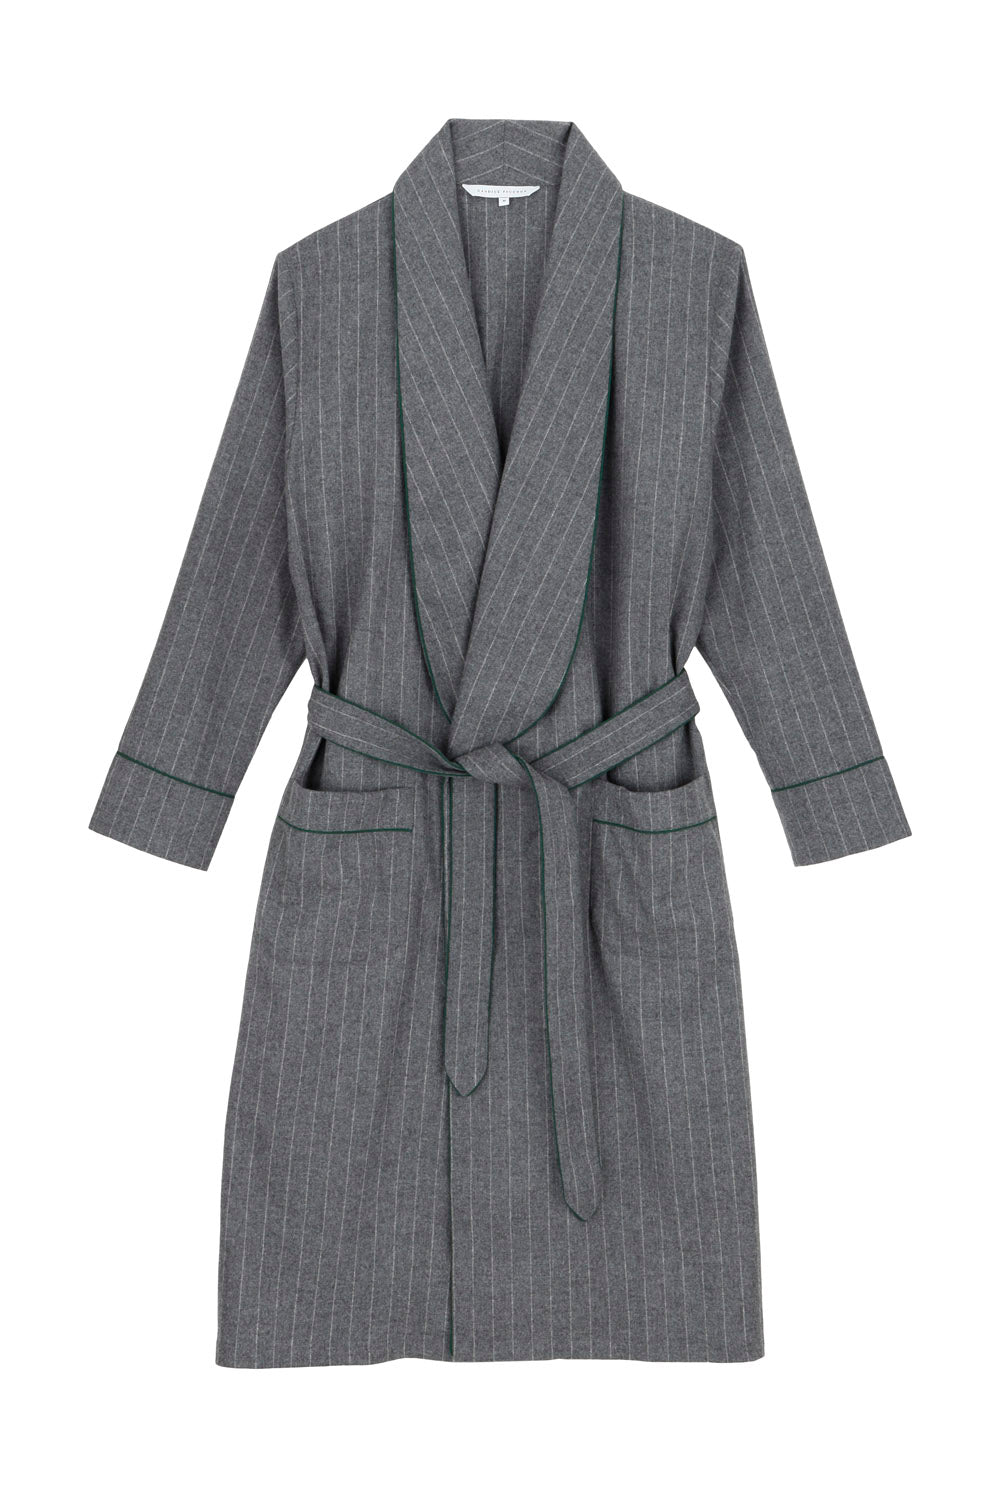 The Brandy in grey chalk stripe wool and cashmere